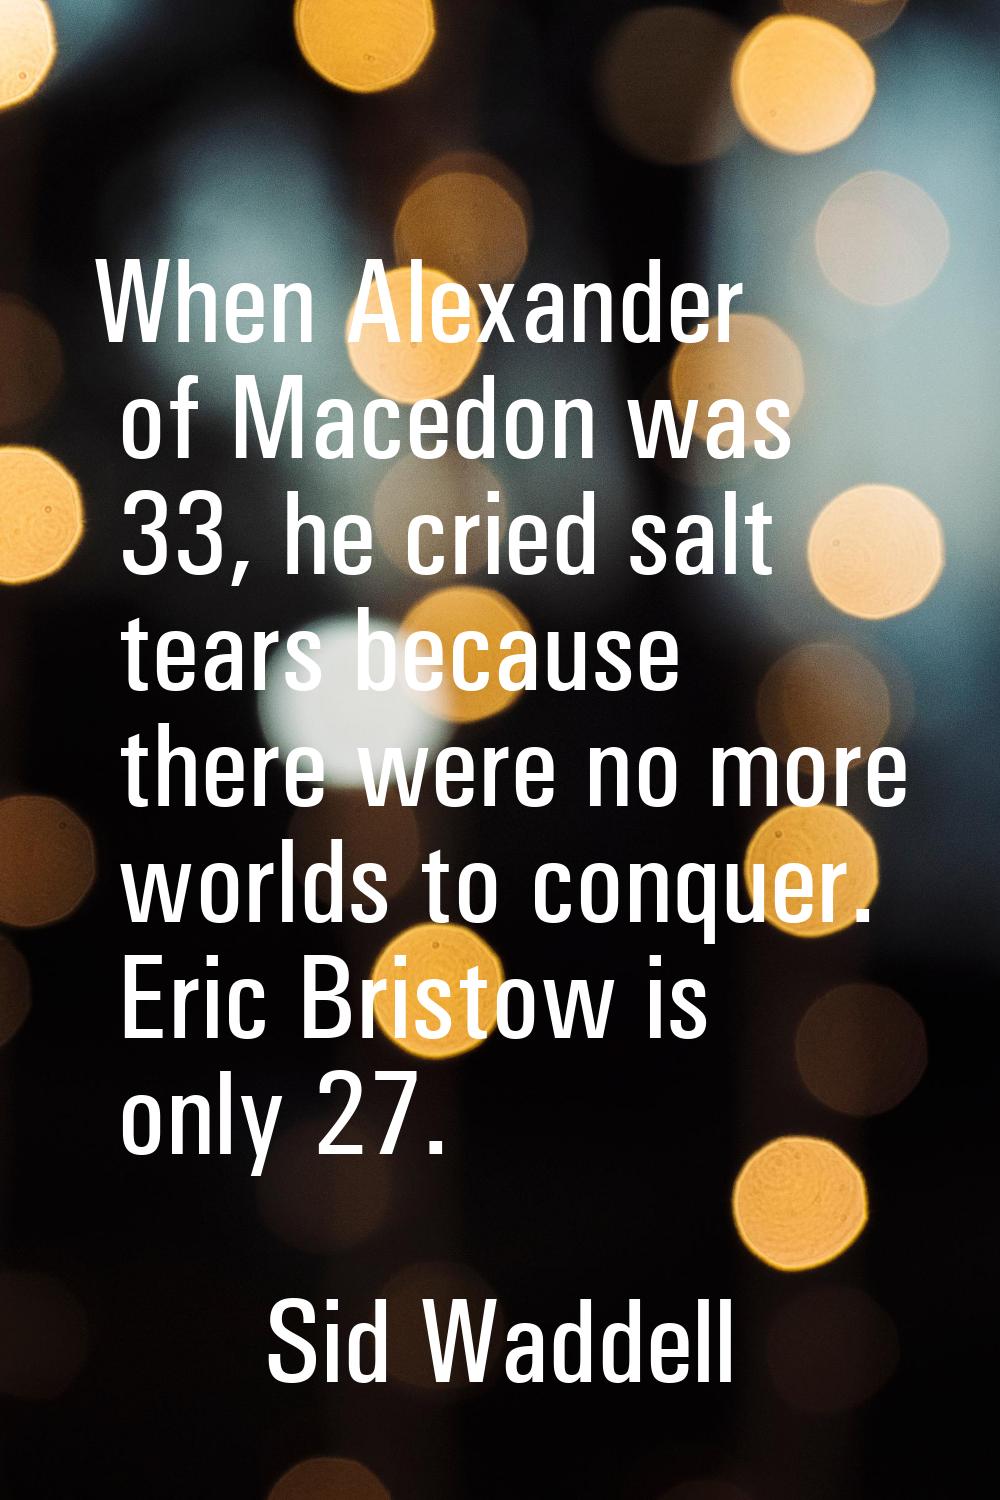 When Alexander of Macedon was 33, he cried salt tears because there were no more worlds to conquer.